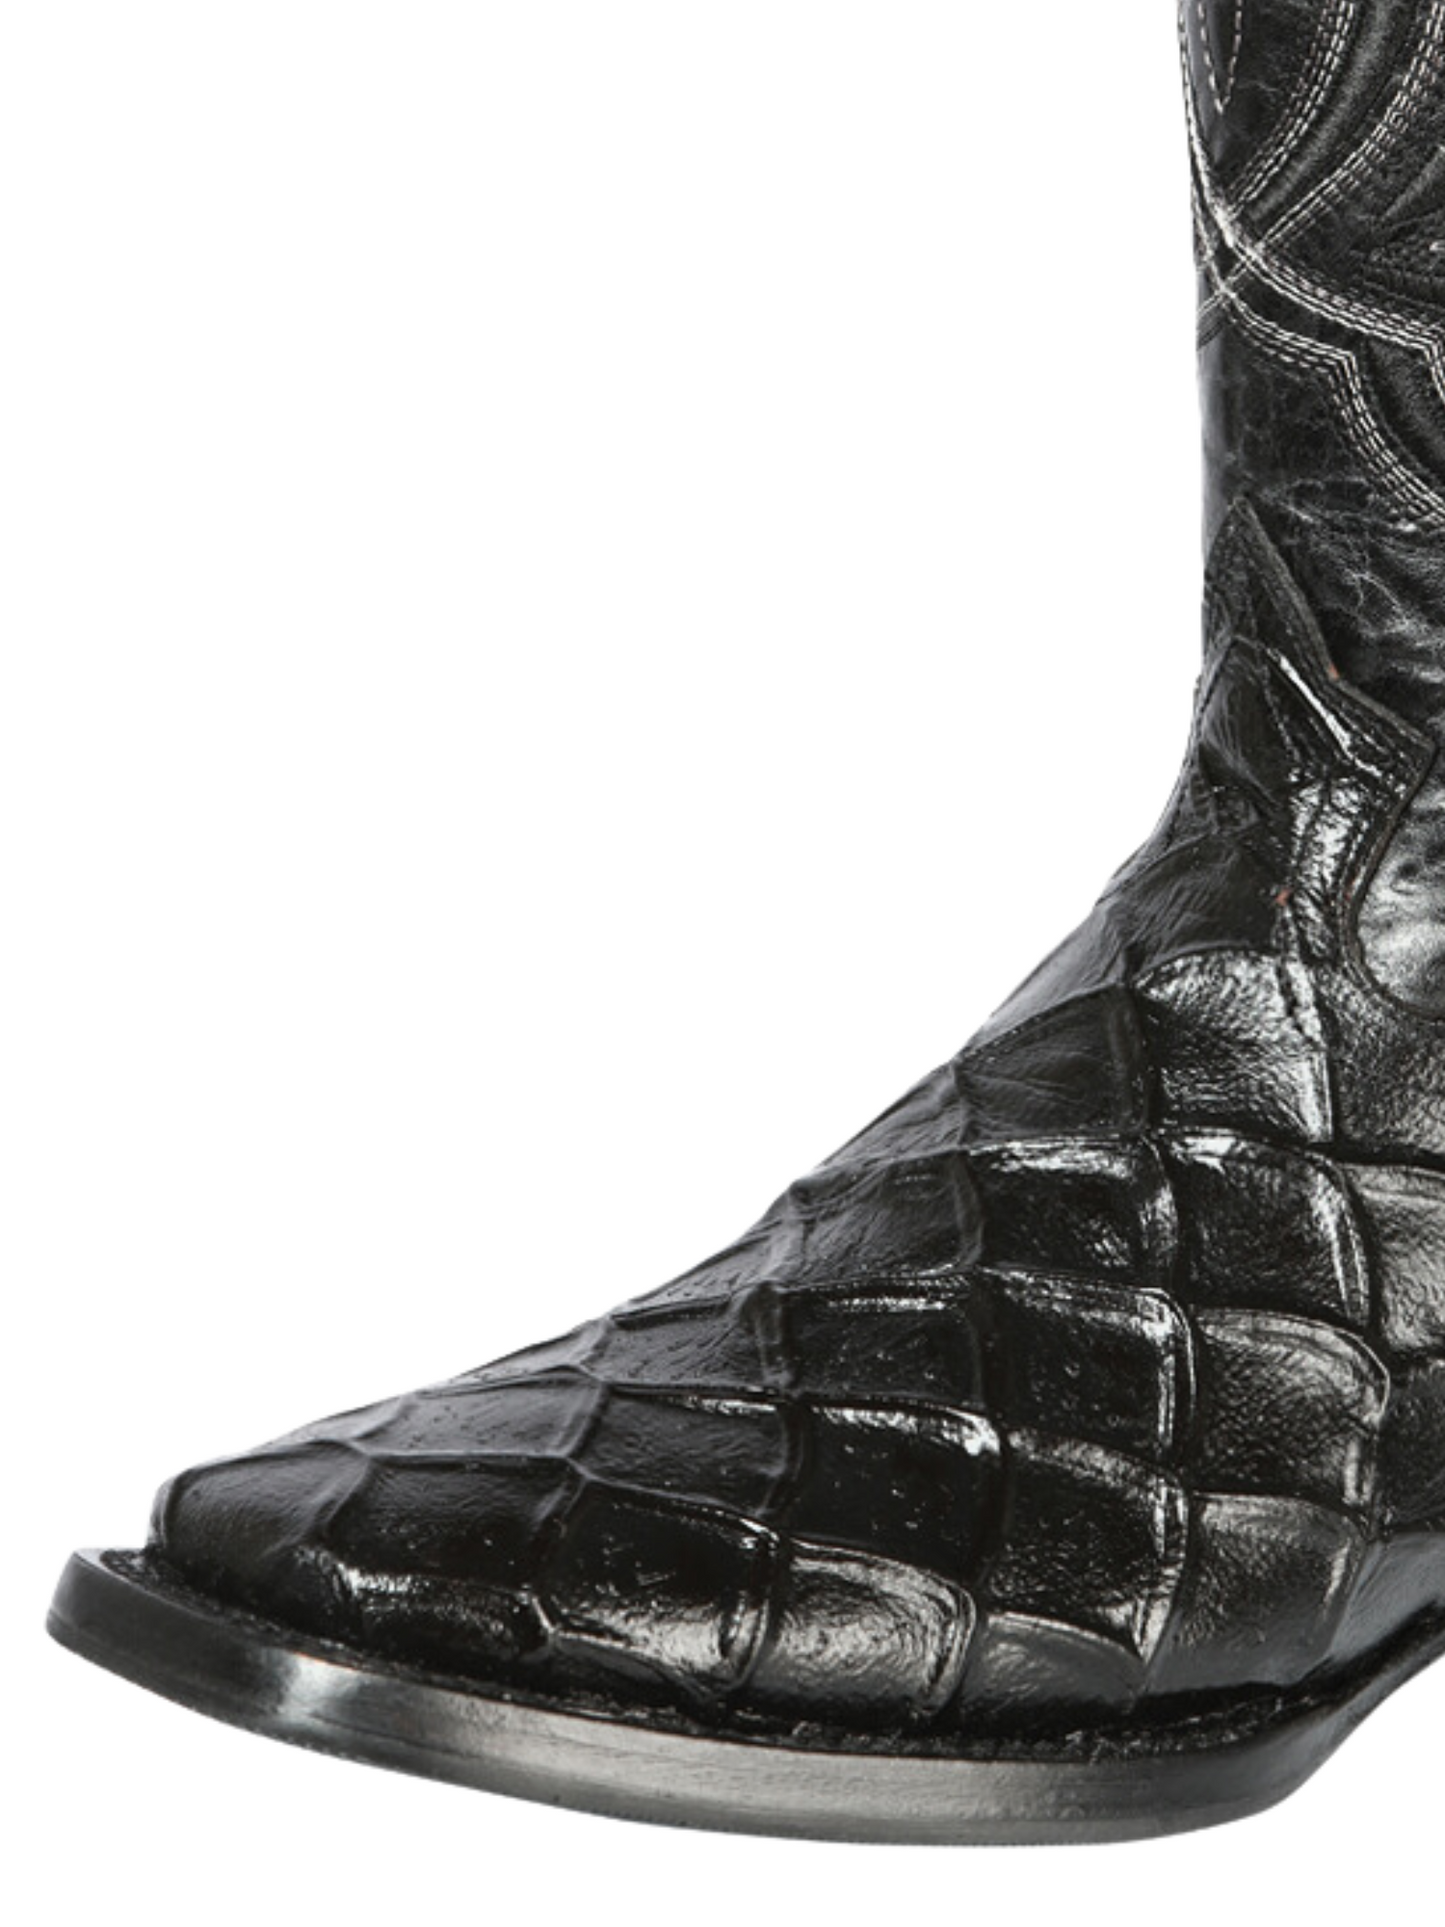 Rodeo Cowboy Boots Imitation of Monster Fish Engraved in Cowhide Leather for Men 'El General' - ID: 44663 Cowboy Boots El General